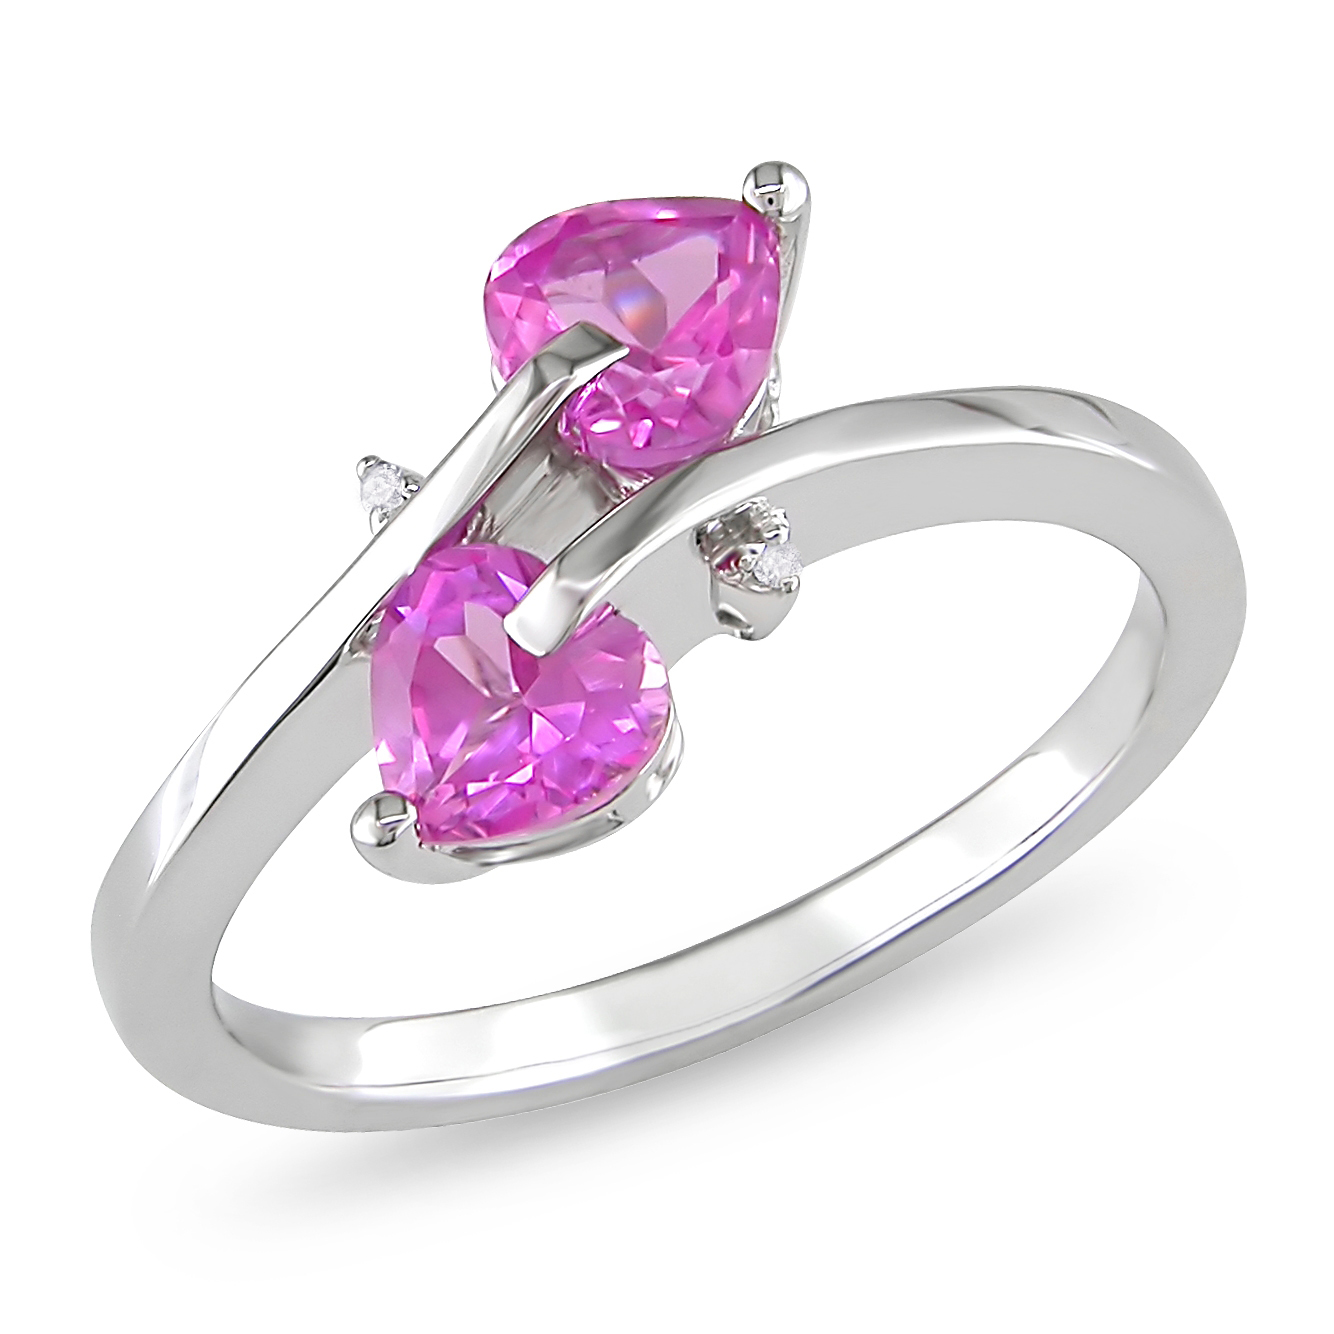 &nbsp; 0.007 Carat T.W. Diamond and 1 Carat T.G.W. Created Pink Sapphire Fashion Ring in Sterling Silver GH I3